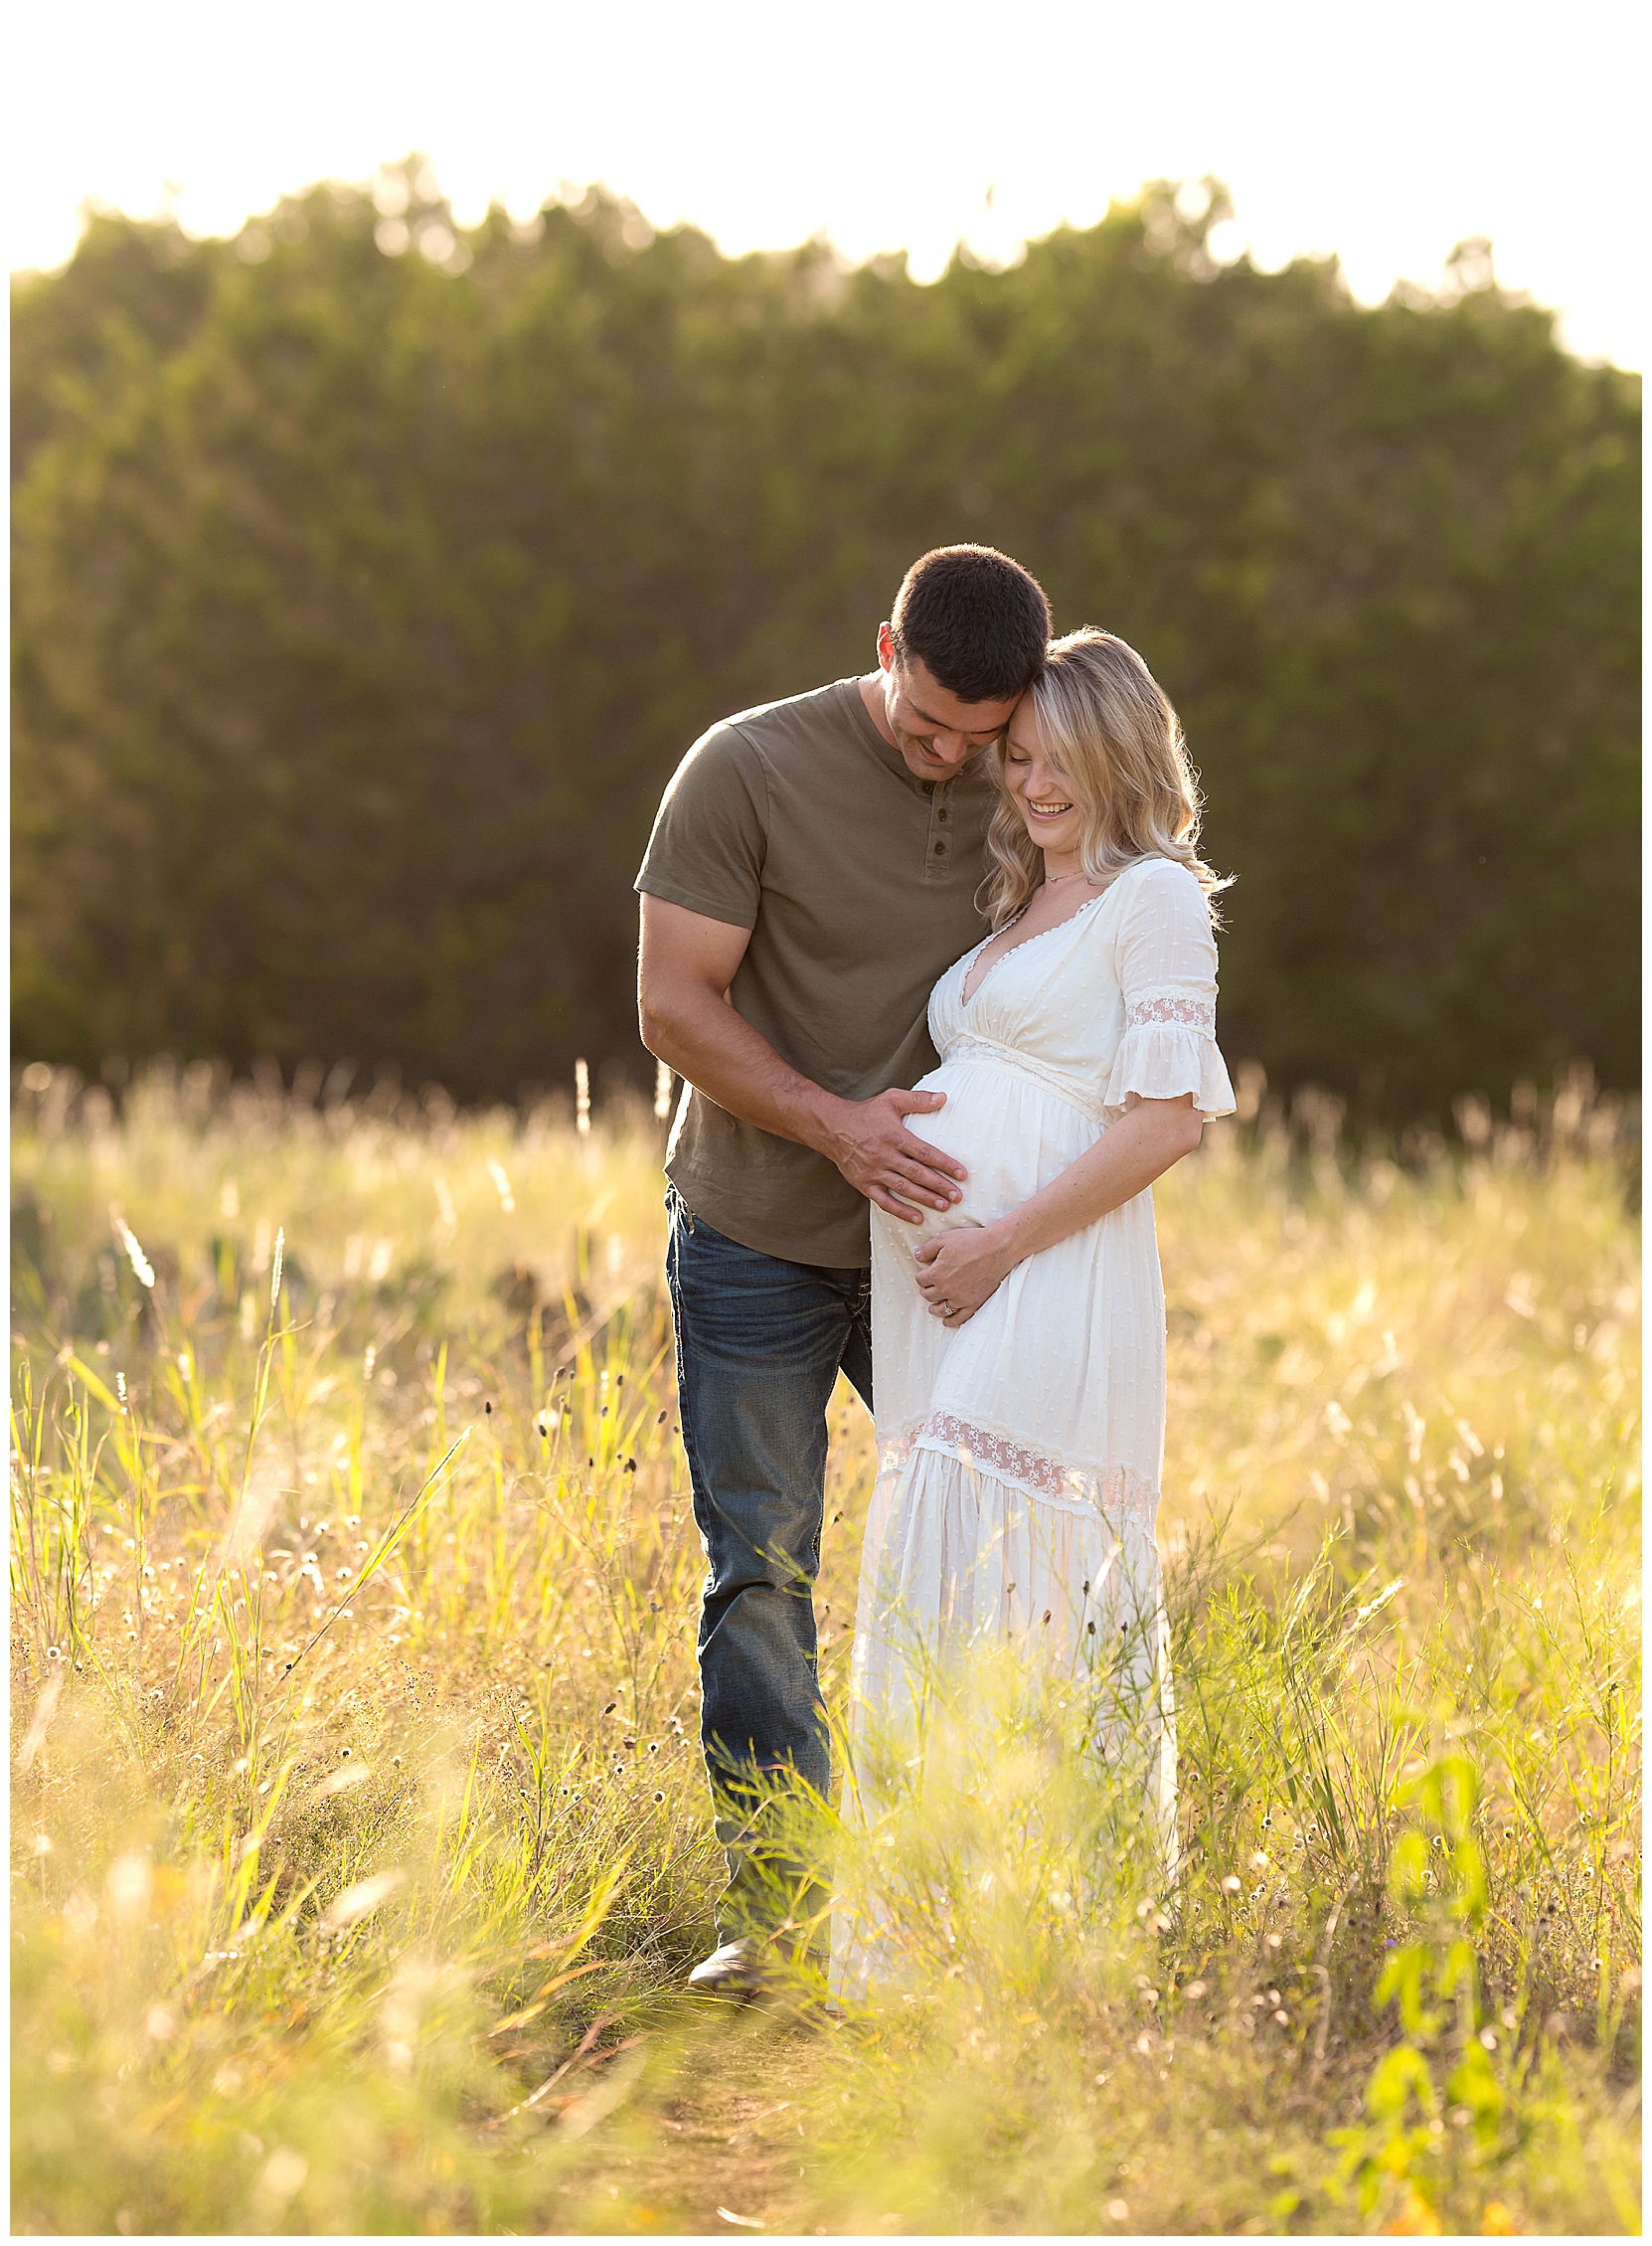 couples maternity photos in a sunny field